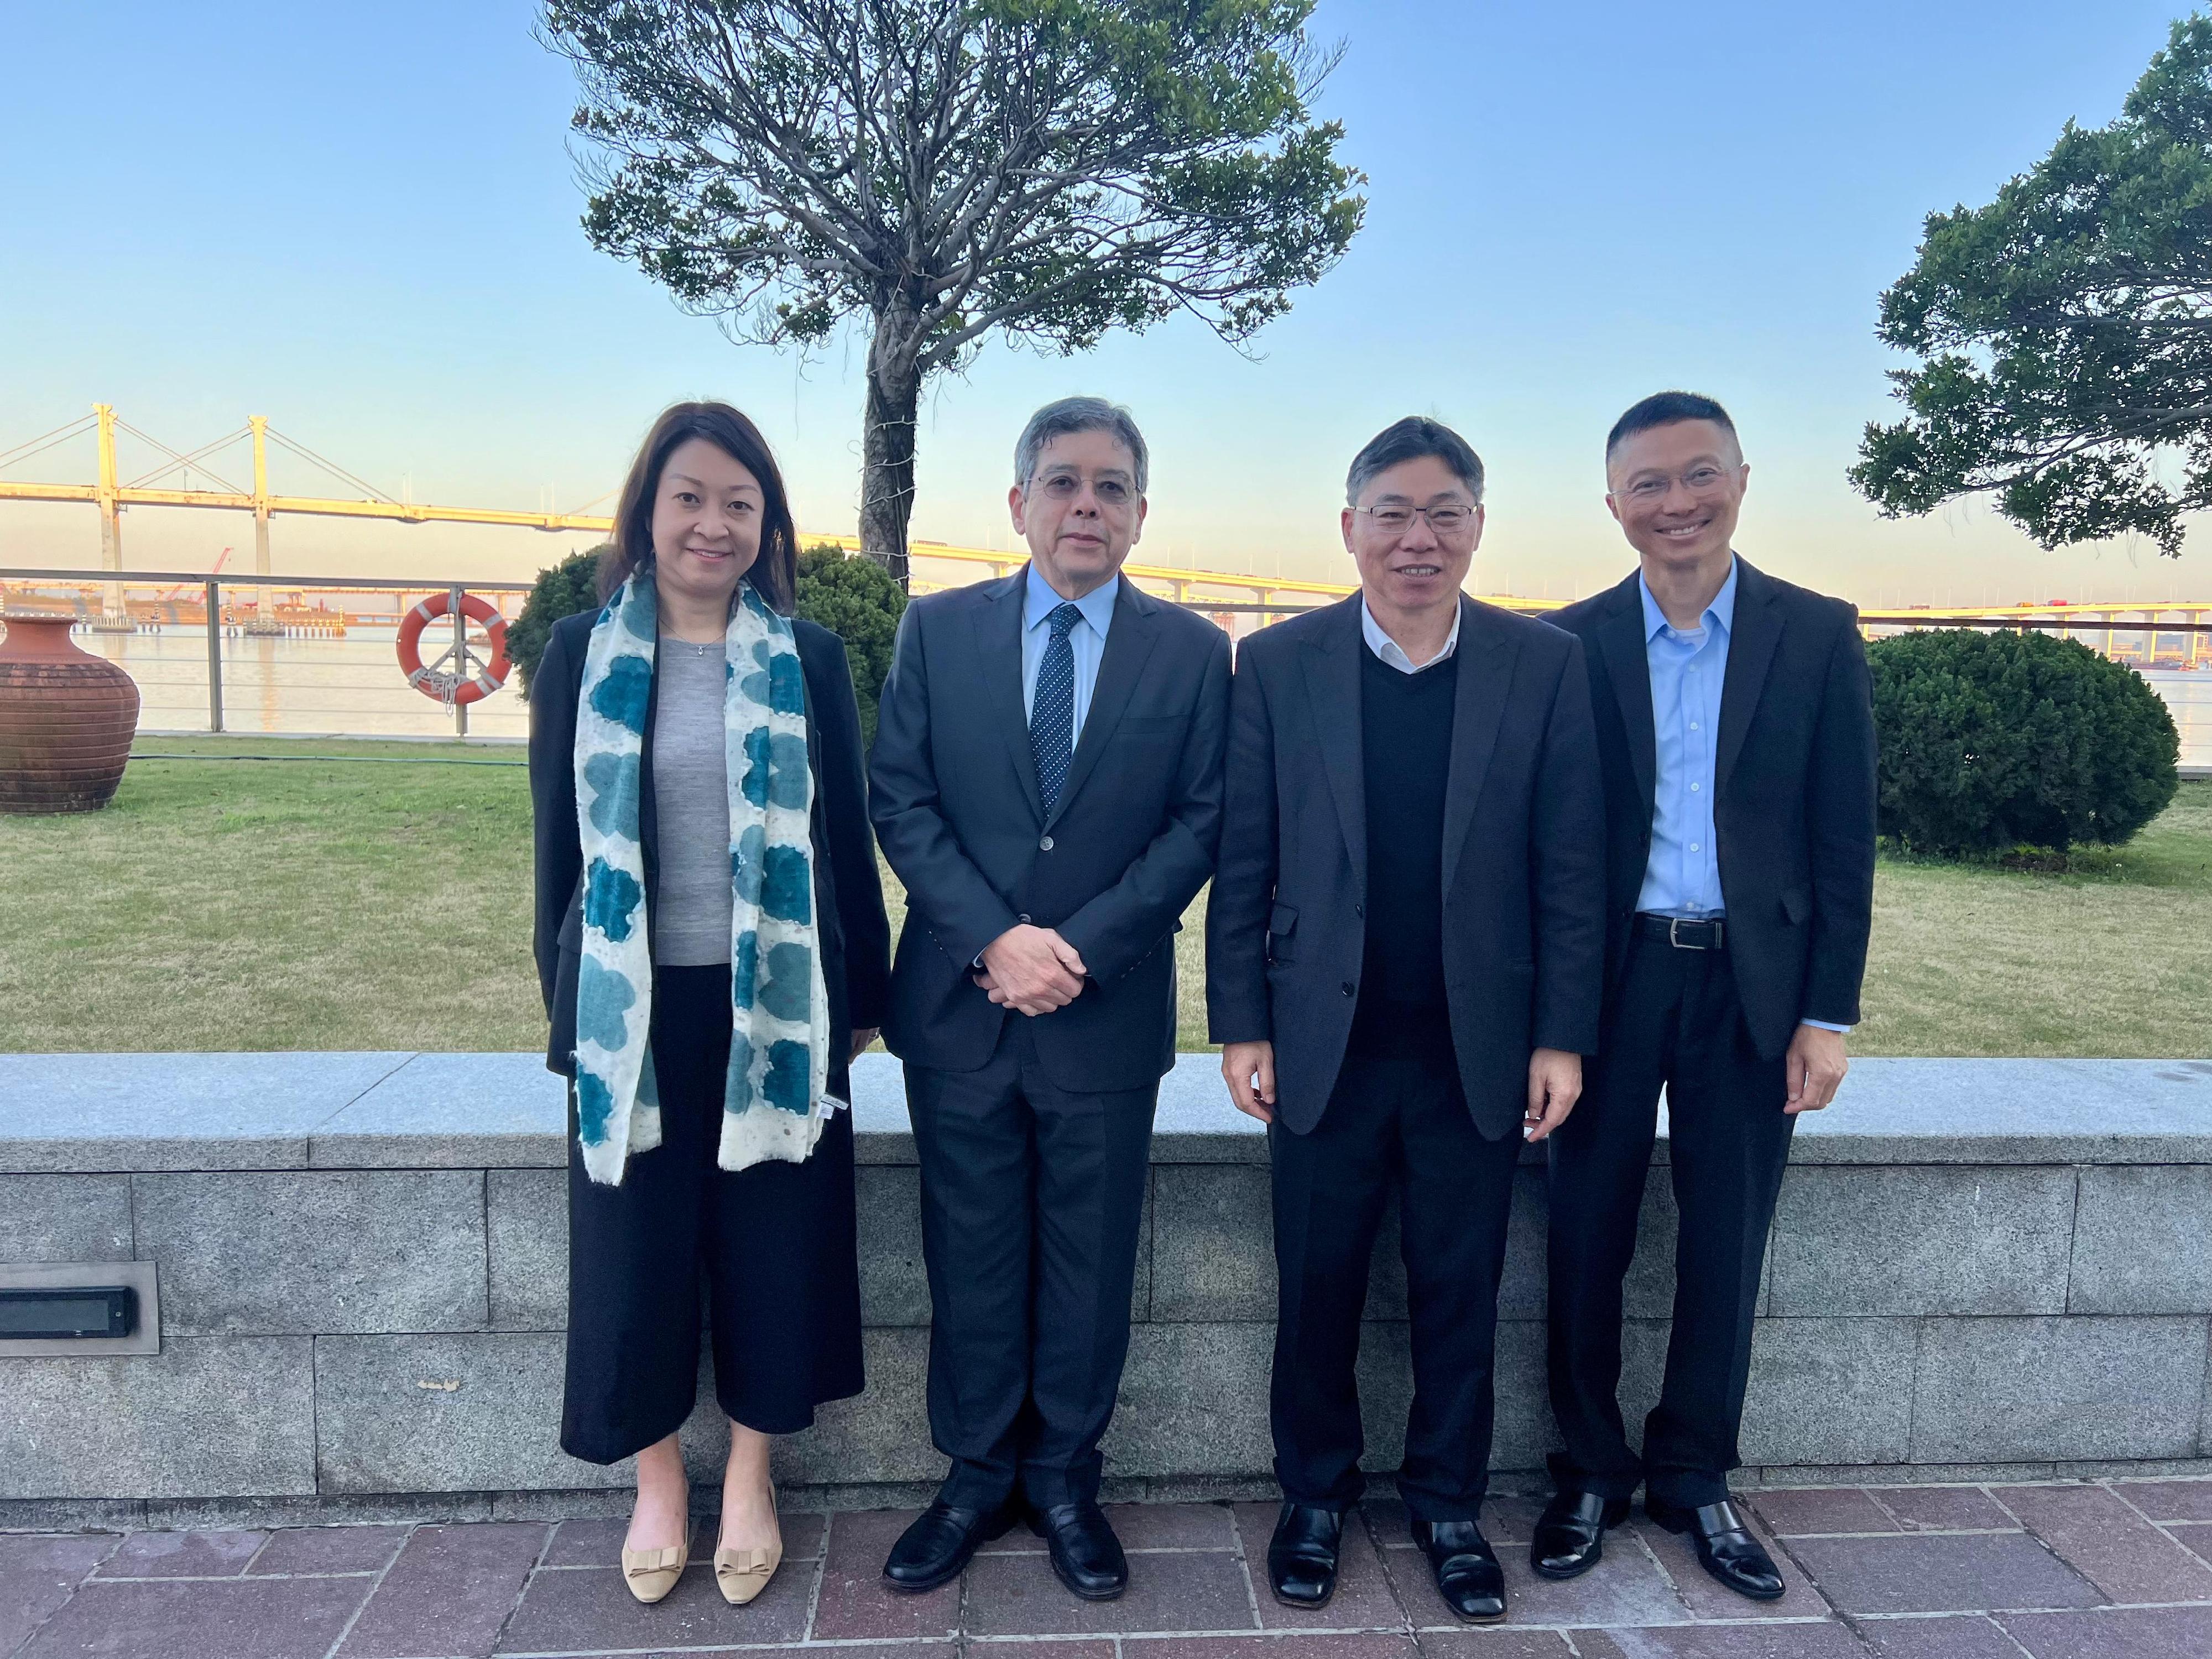 The Secretary for Transport and Logistics, Mr Lam Sai-hung, visited Zhuhai and Macao today (March 12). Mr Lam (second right) is pictured with the Secretary for Transport and Public Works of Macao, Mr Raimundo Arrais do Rosário (second left); the Director of the Macao Transport Bureau, Mr Lam Hin-san (first right); and the Commissioner for Transport, Ms Angela Lee (first left).